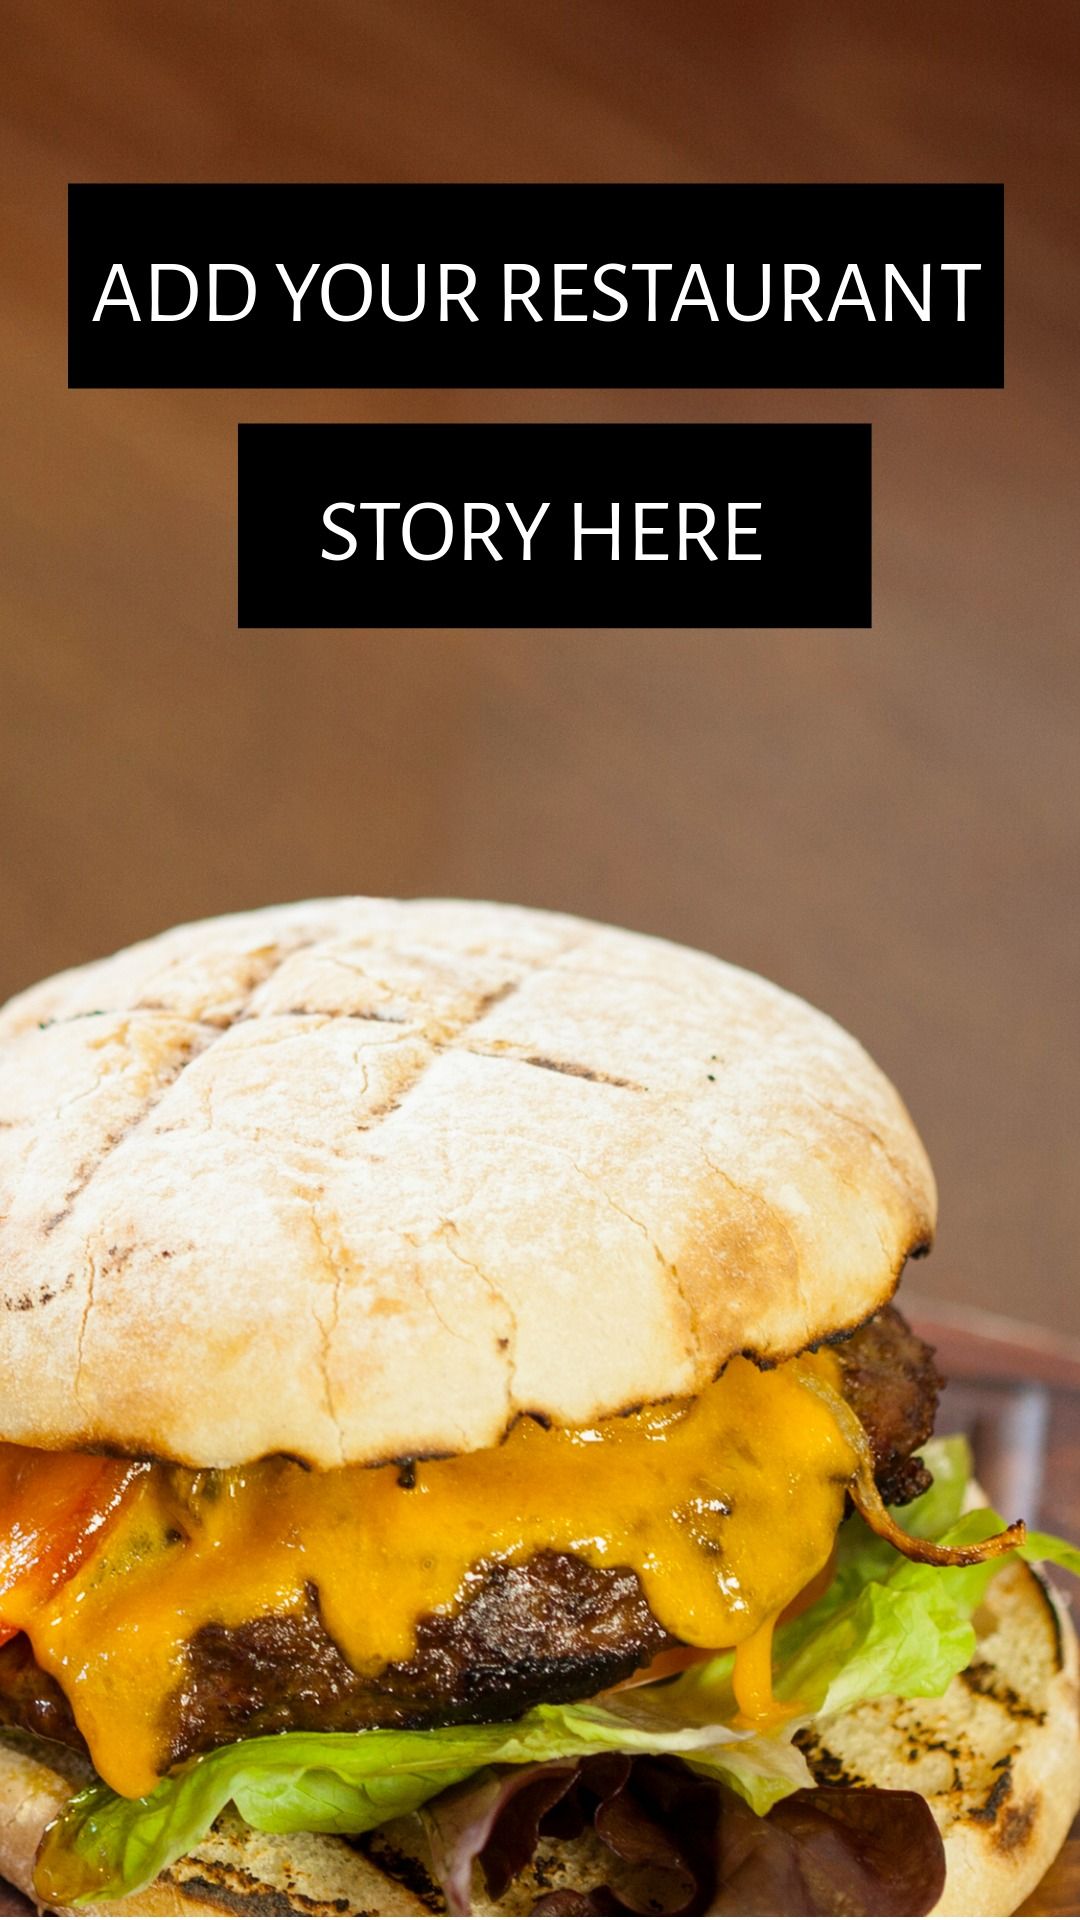 Hamburger restaurant Instagram story template - How to increase your followers on multiple platforms - Image